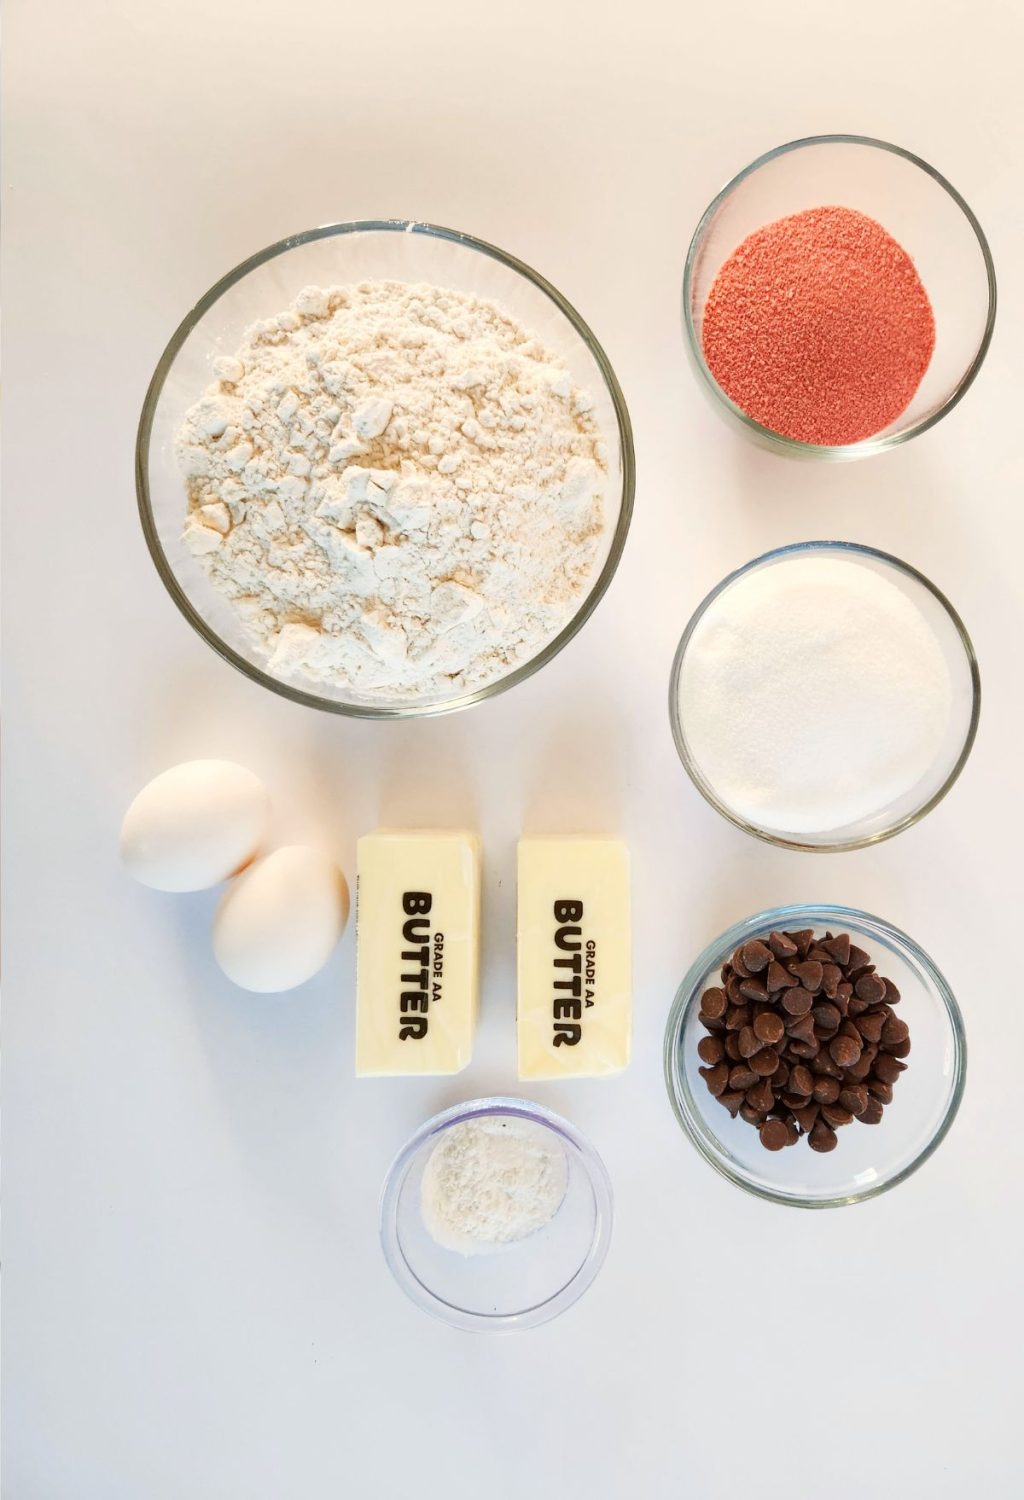 The ingredients for a chocolate cake are laid out on a white surface.